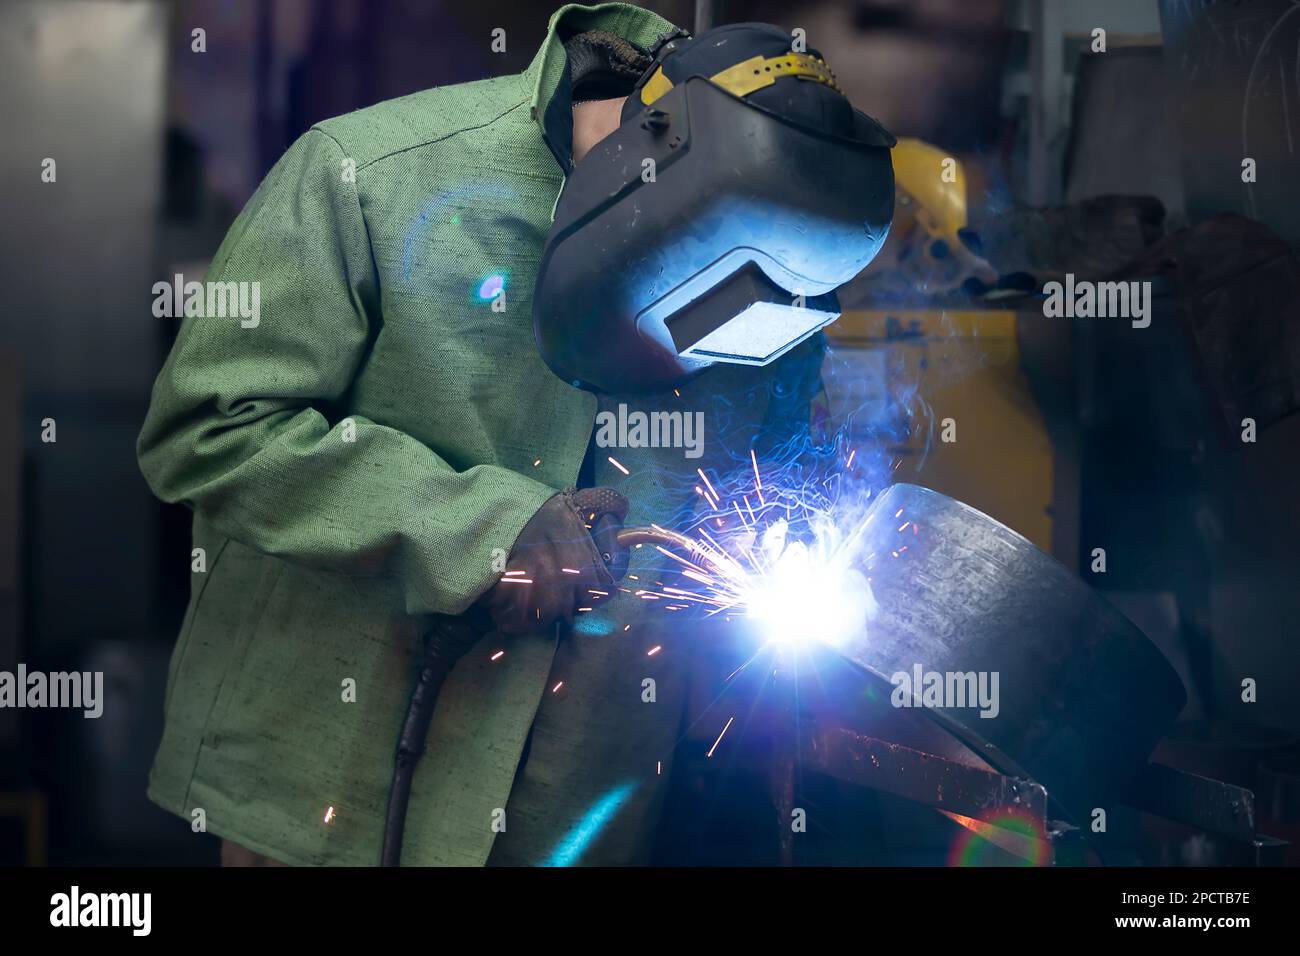 Welder in a protective mask works and sparks fly flame Stock Photo